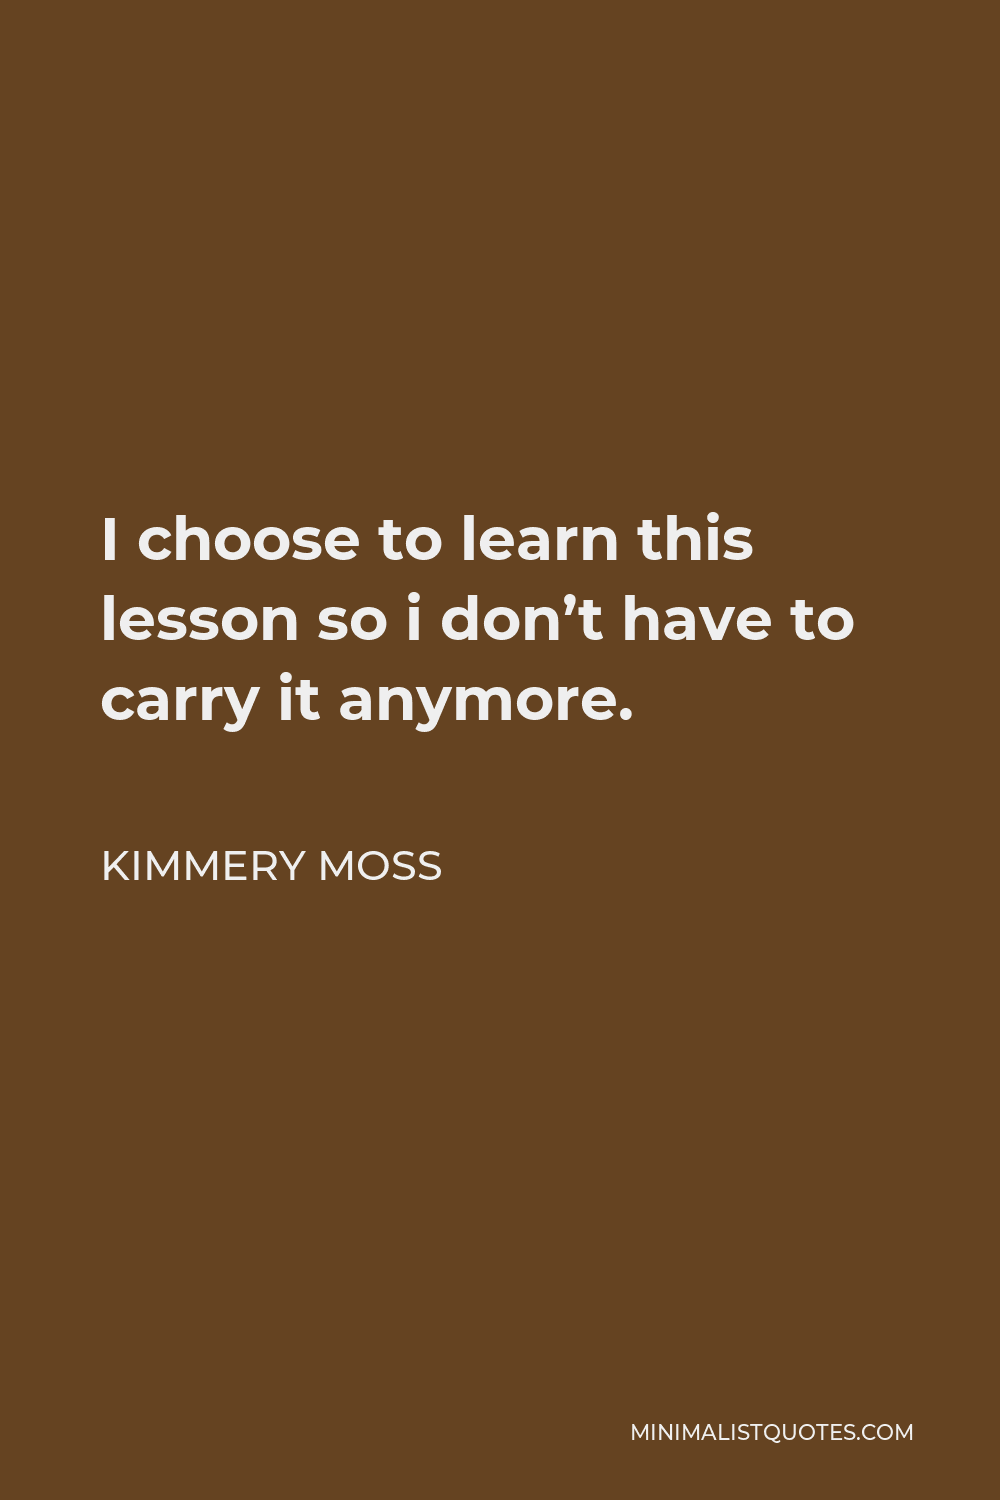 Kimmery Moss Quote - I choose to learn this lesson so i don’t have to carry it anymore.